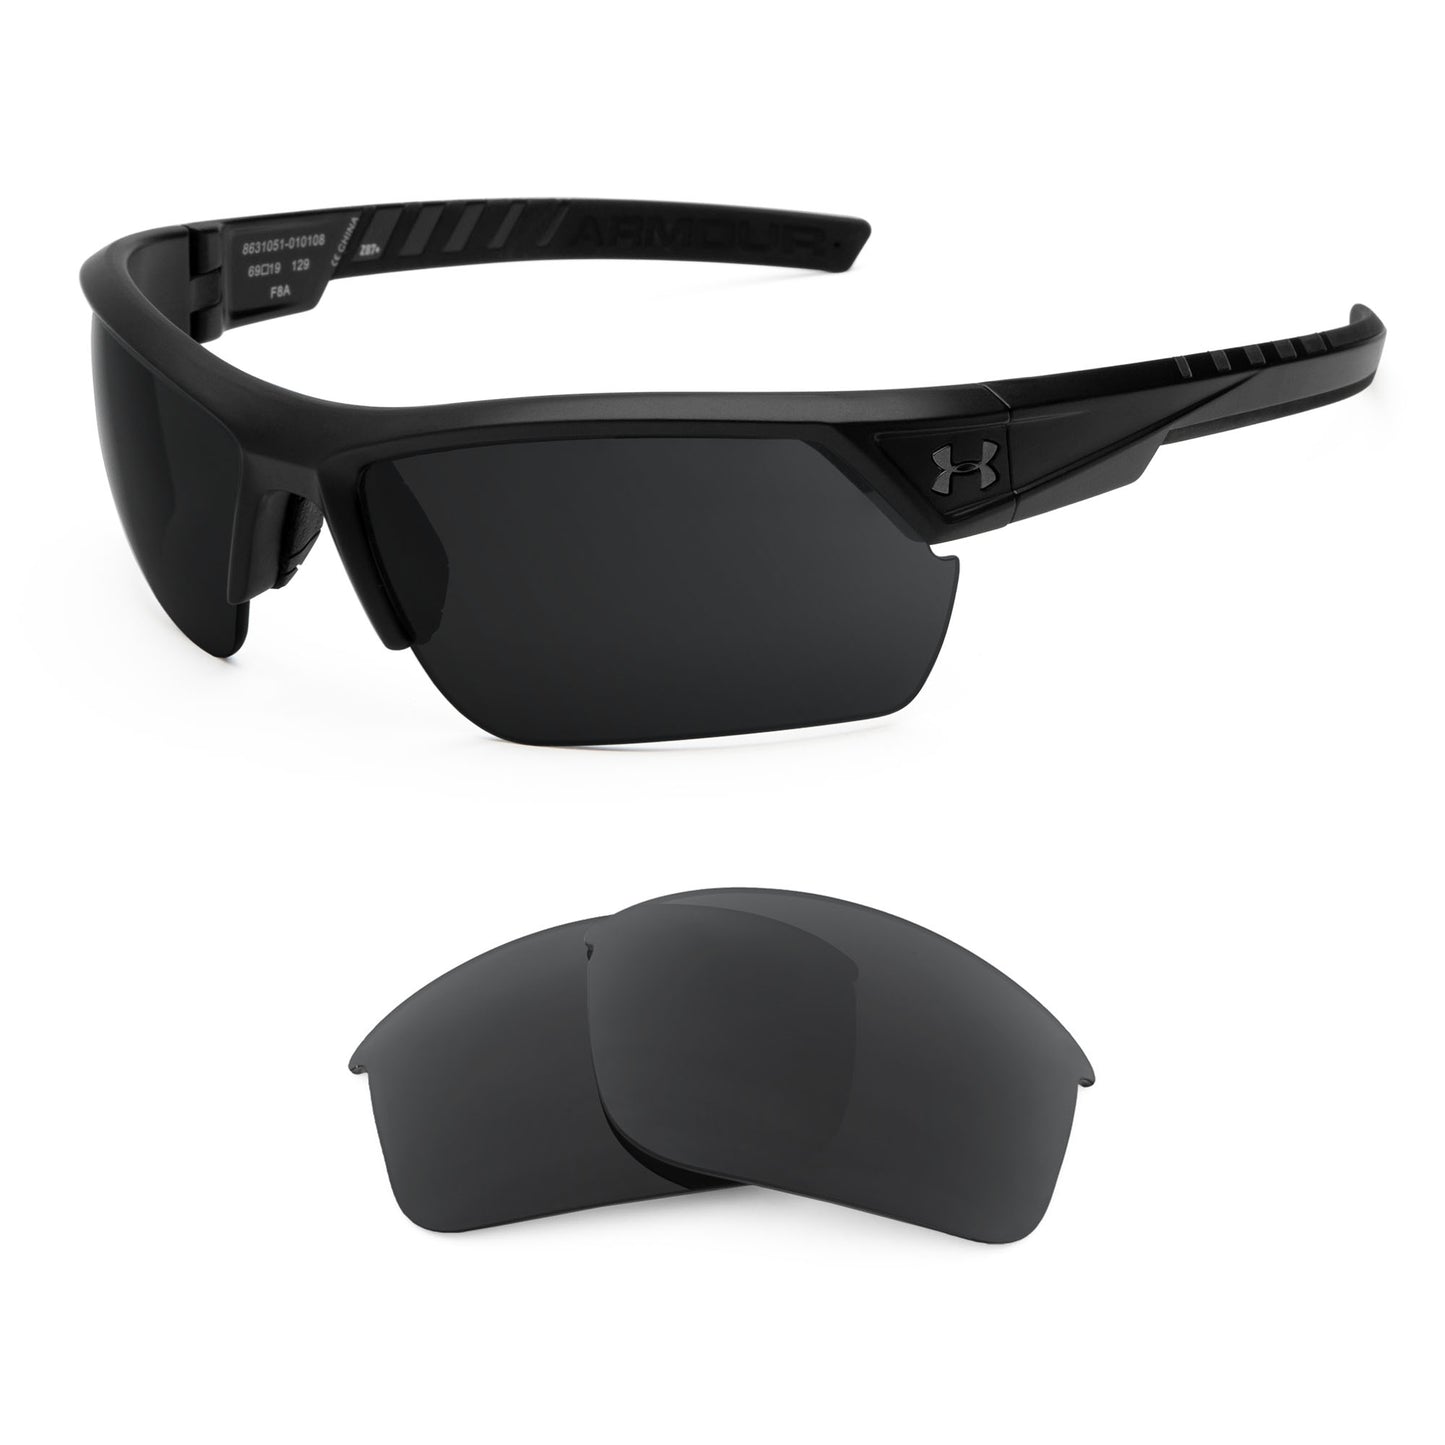 Under Armour Igniter 2.0 sunglasses with replacement lenses